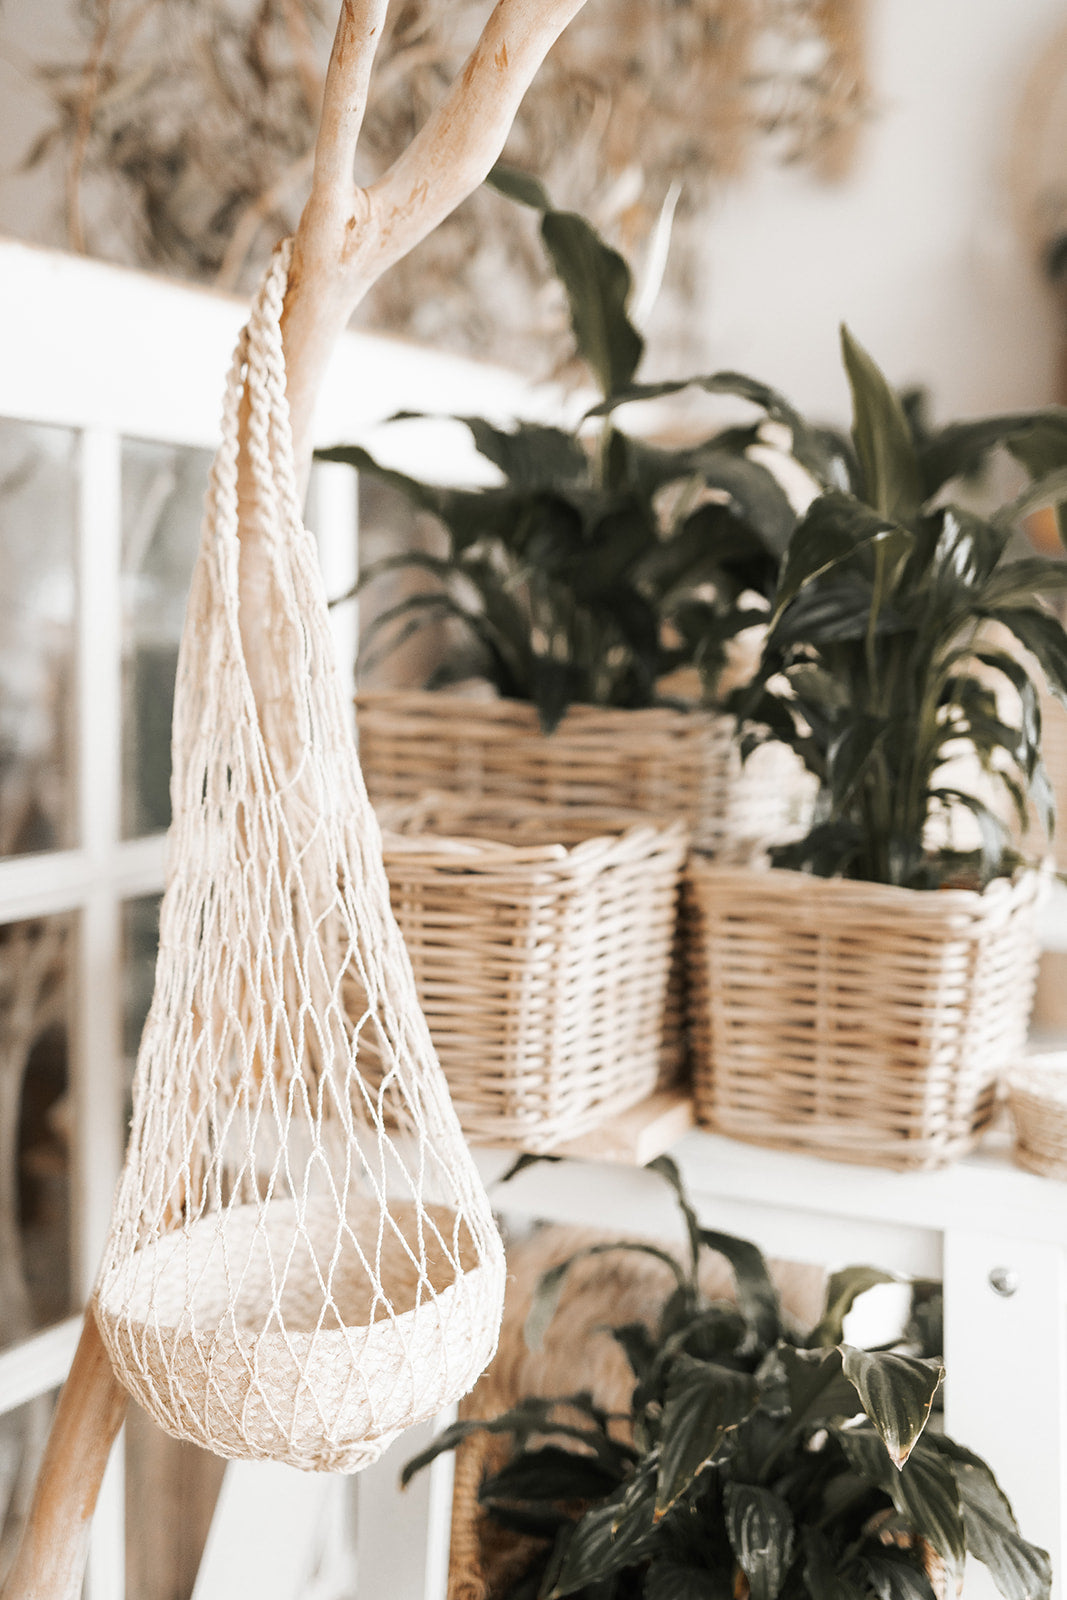 Eco-friendly fibres: what makes our homewares sustainable?